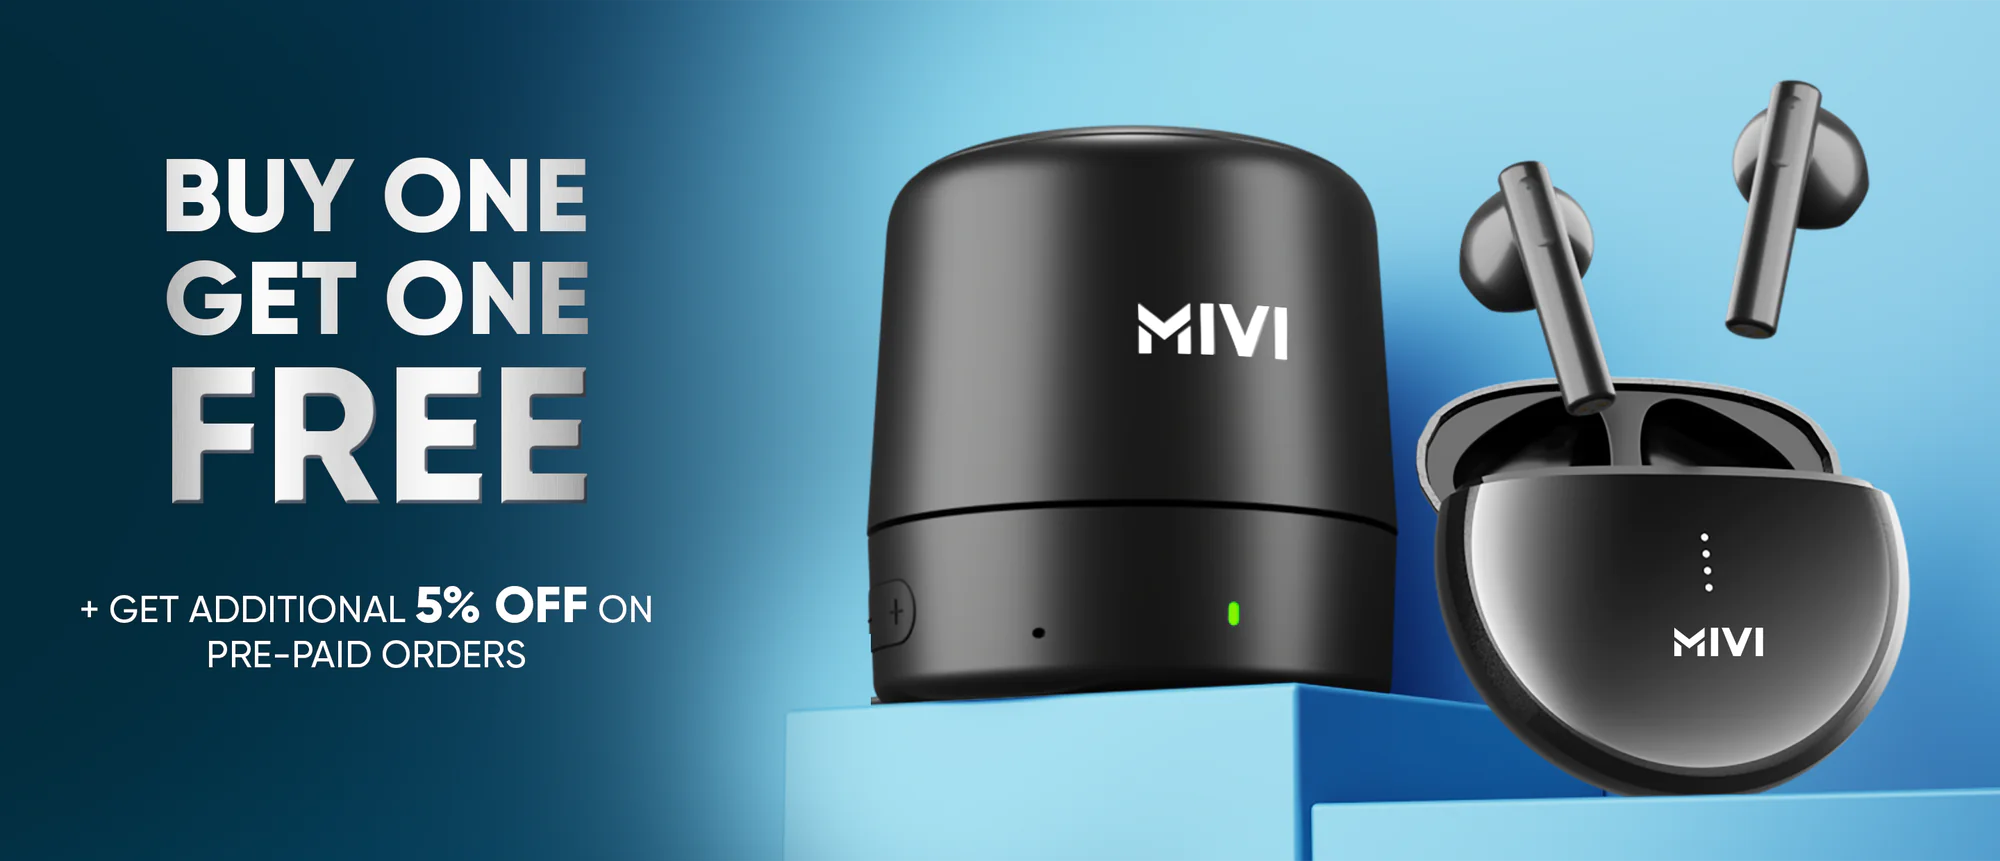 Mivi Buy 1 Get 1 Free + Get Additional 5% Off on Prepaid Orders